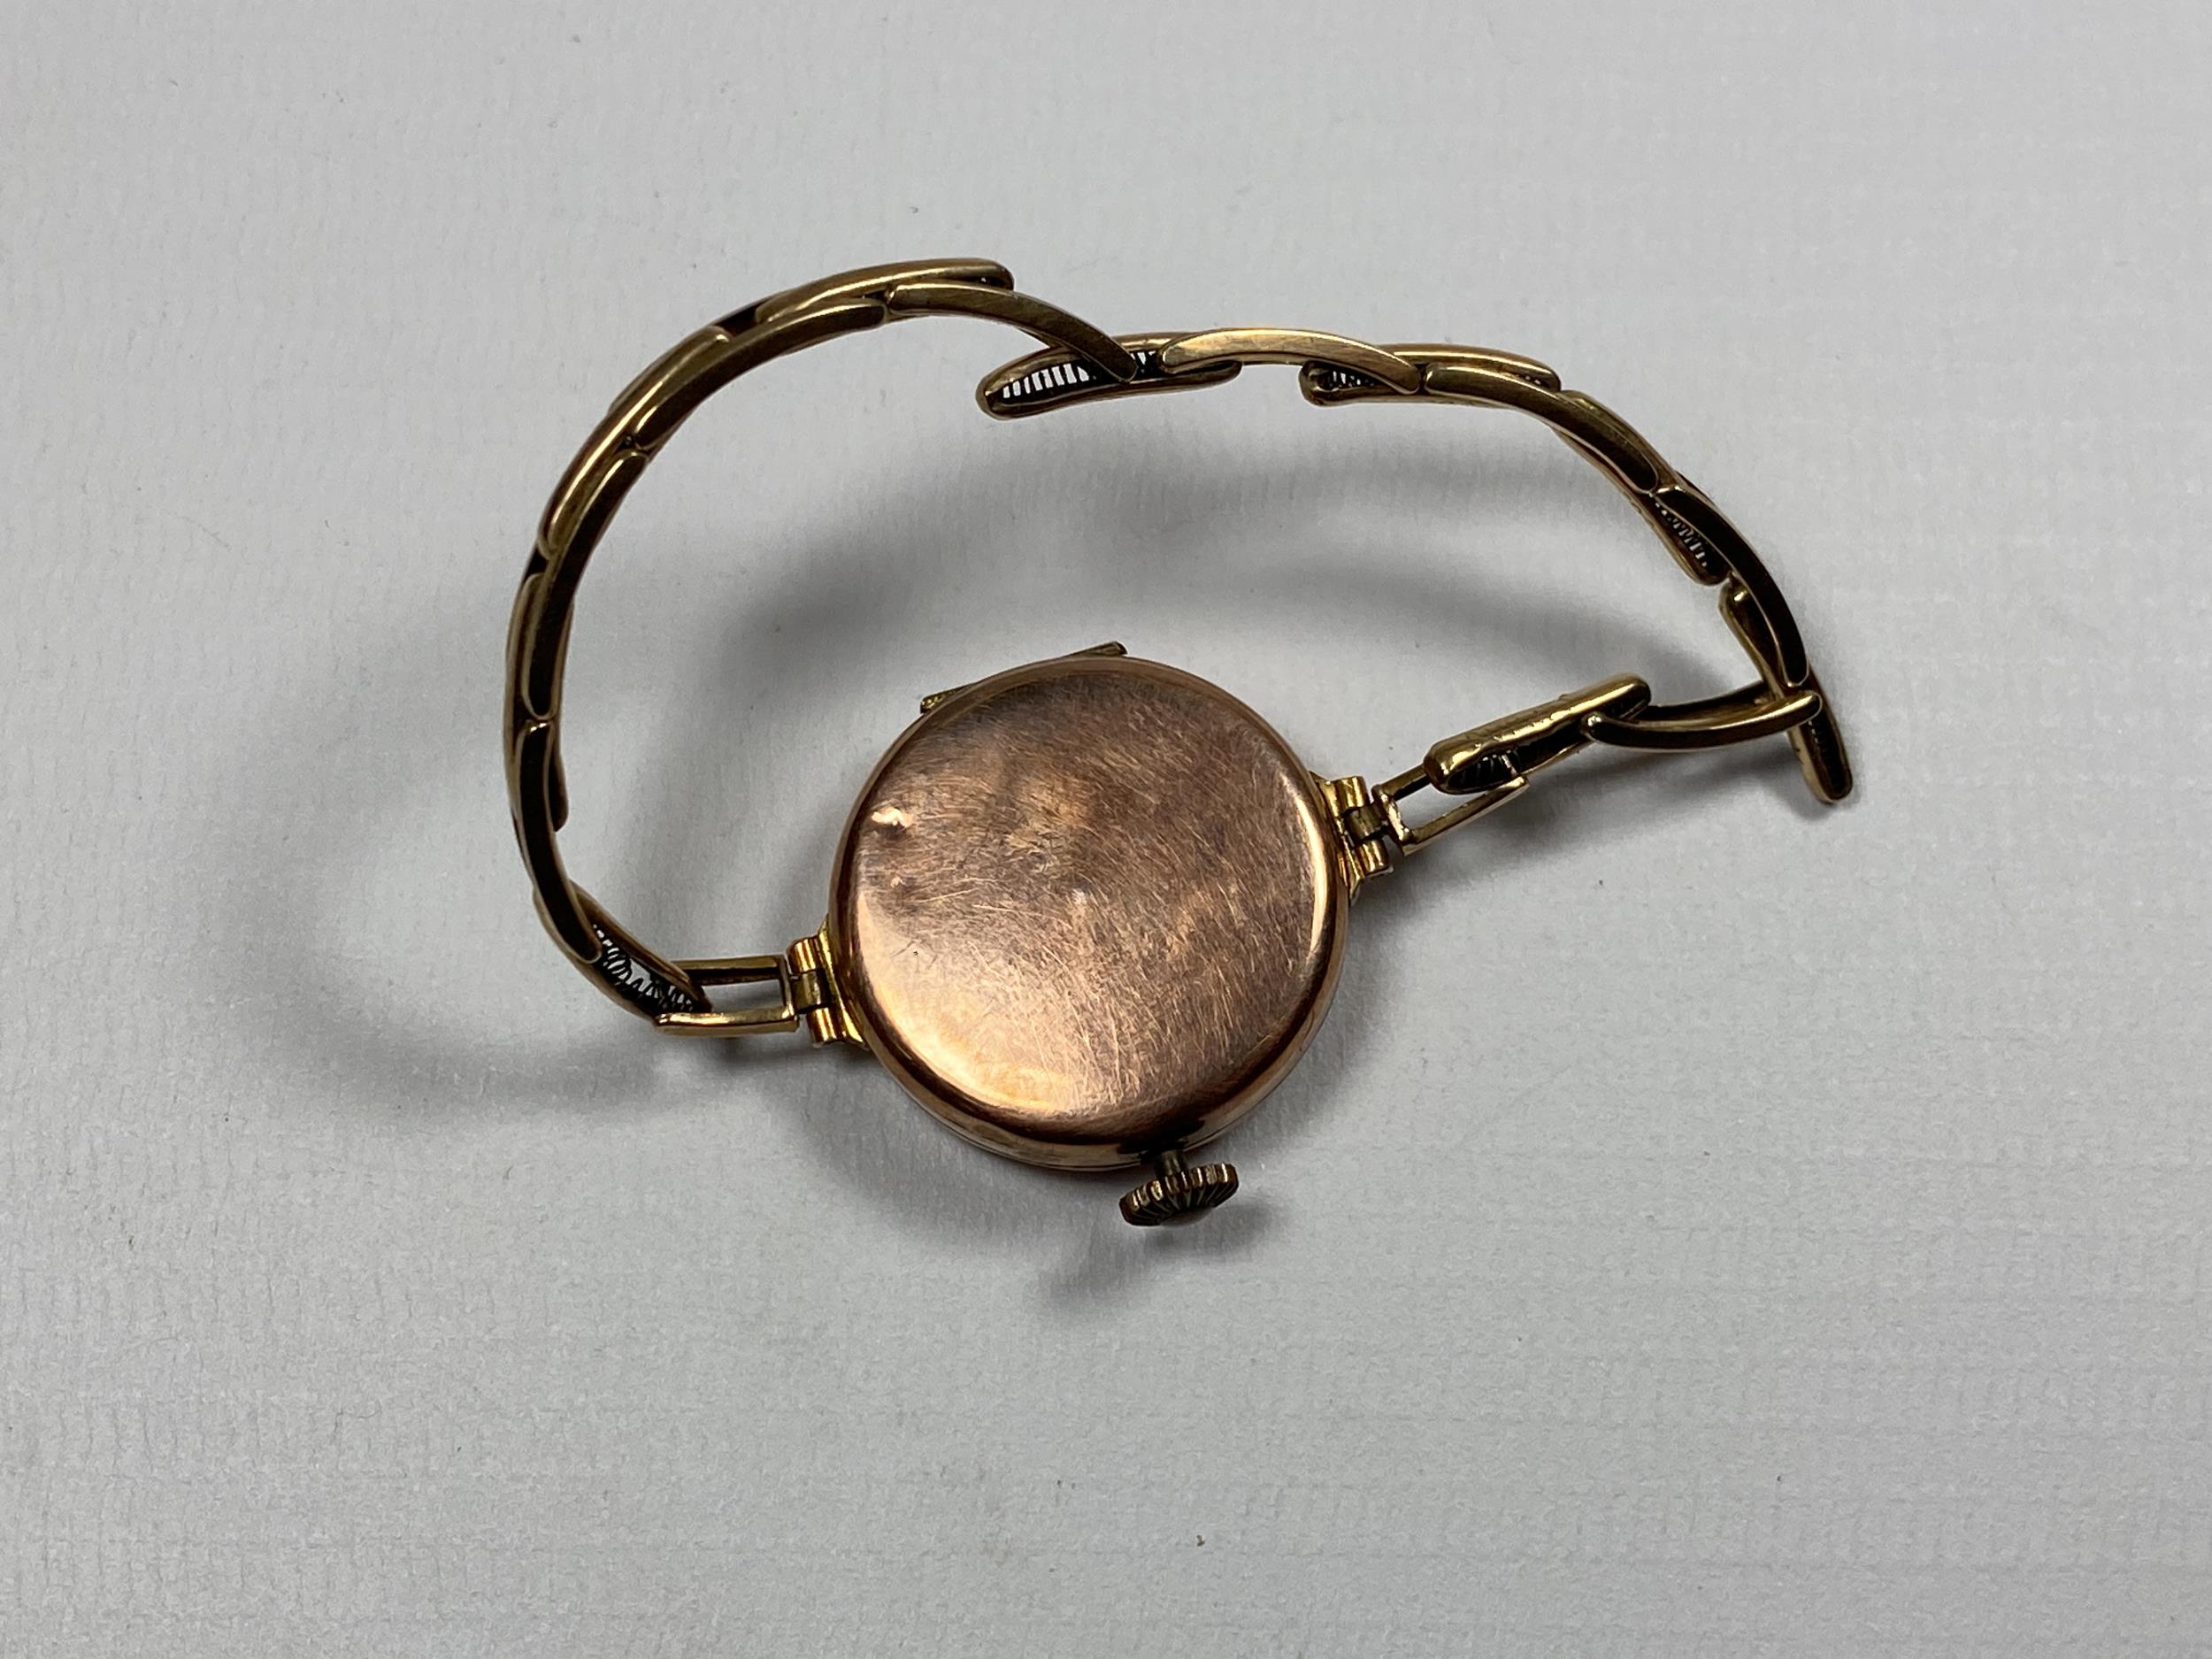 A 9CT YELLOW GOLD LADIES WATCH & STRAP, CIRCA 1910-1920, TOTAL WEIGHT 15.7G - Image 2 of 3